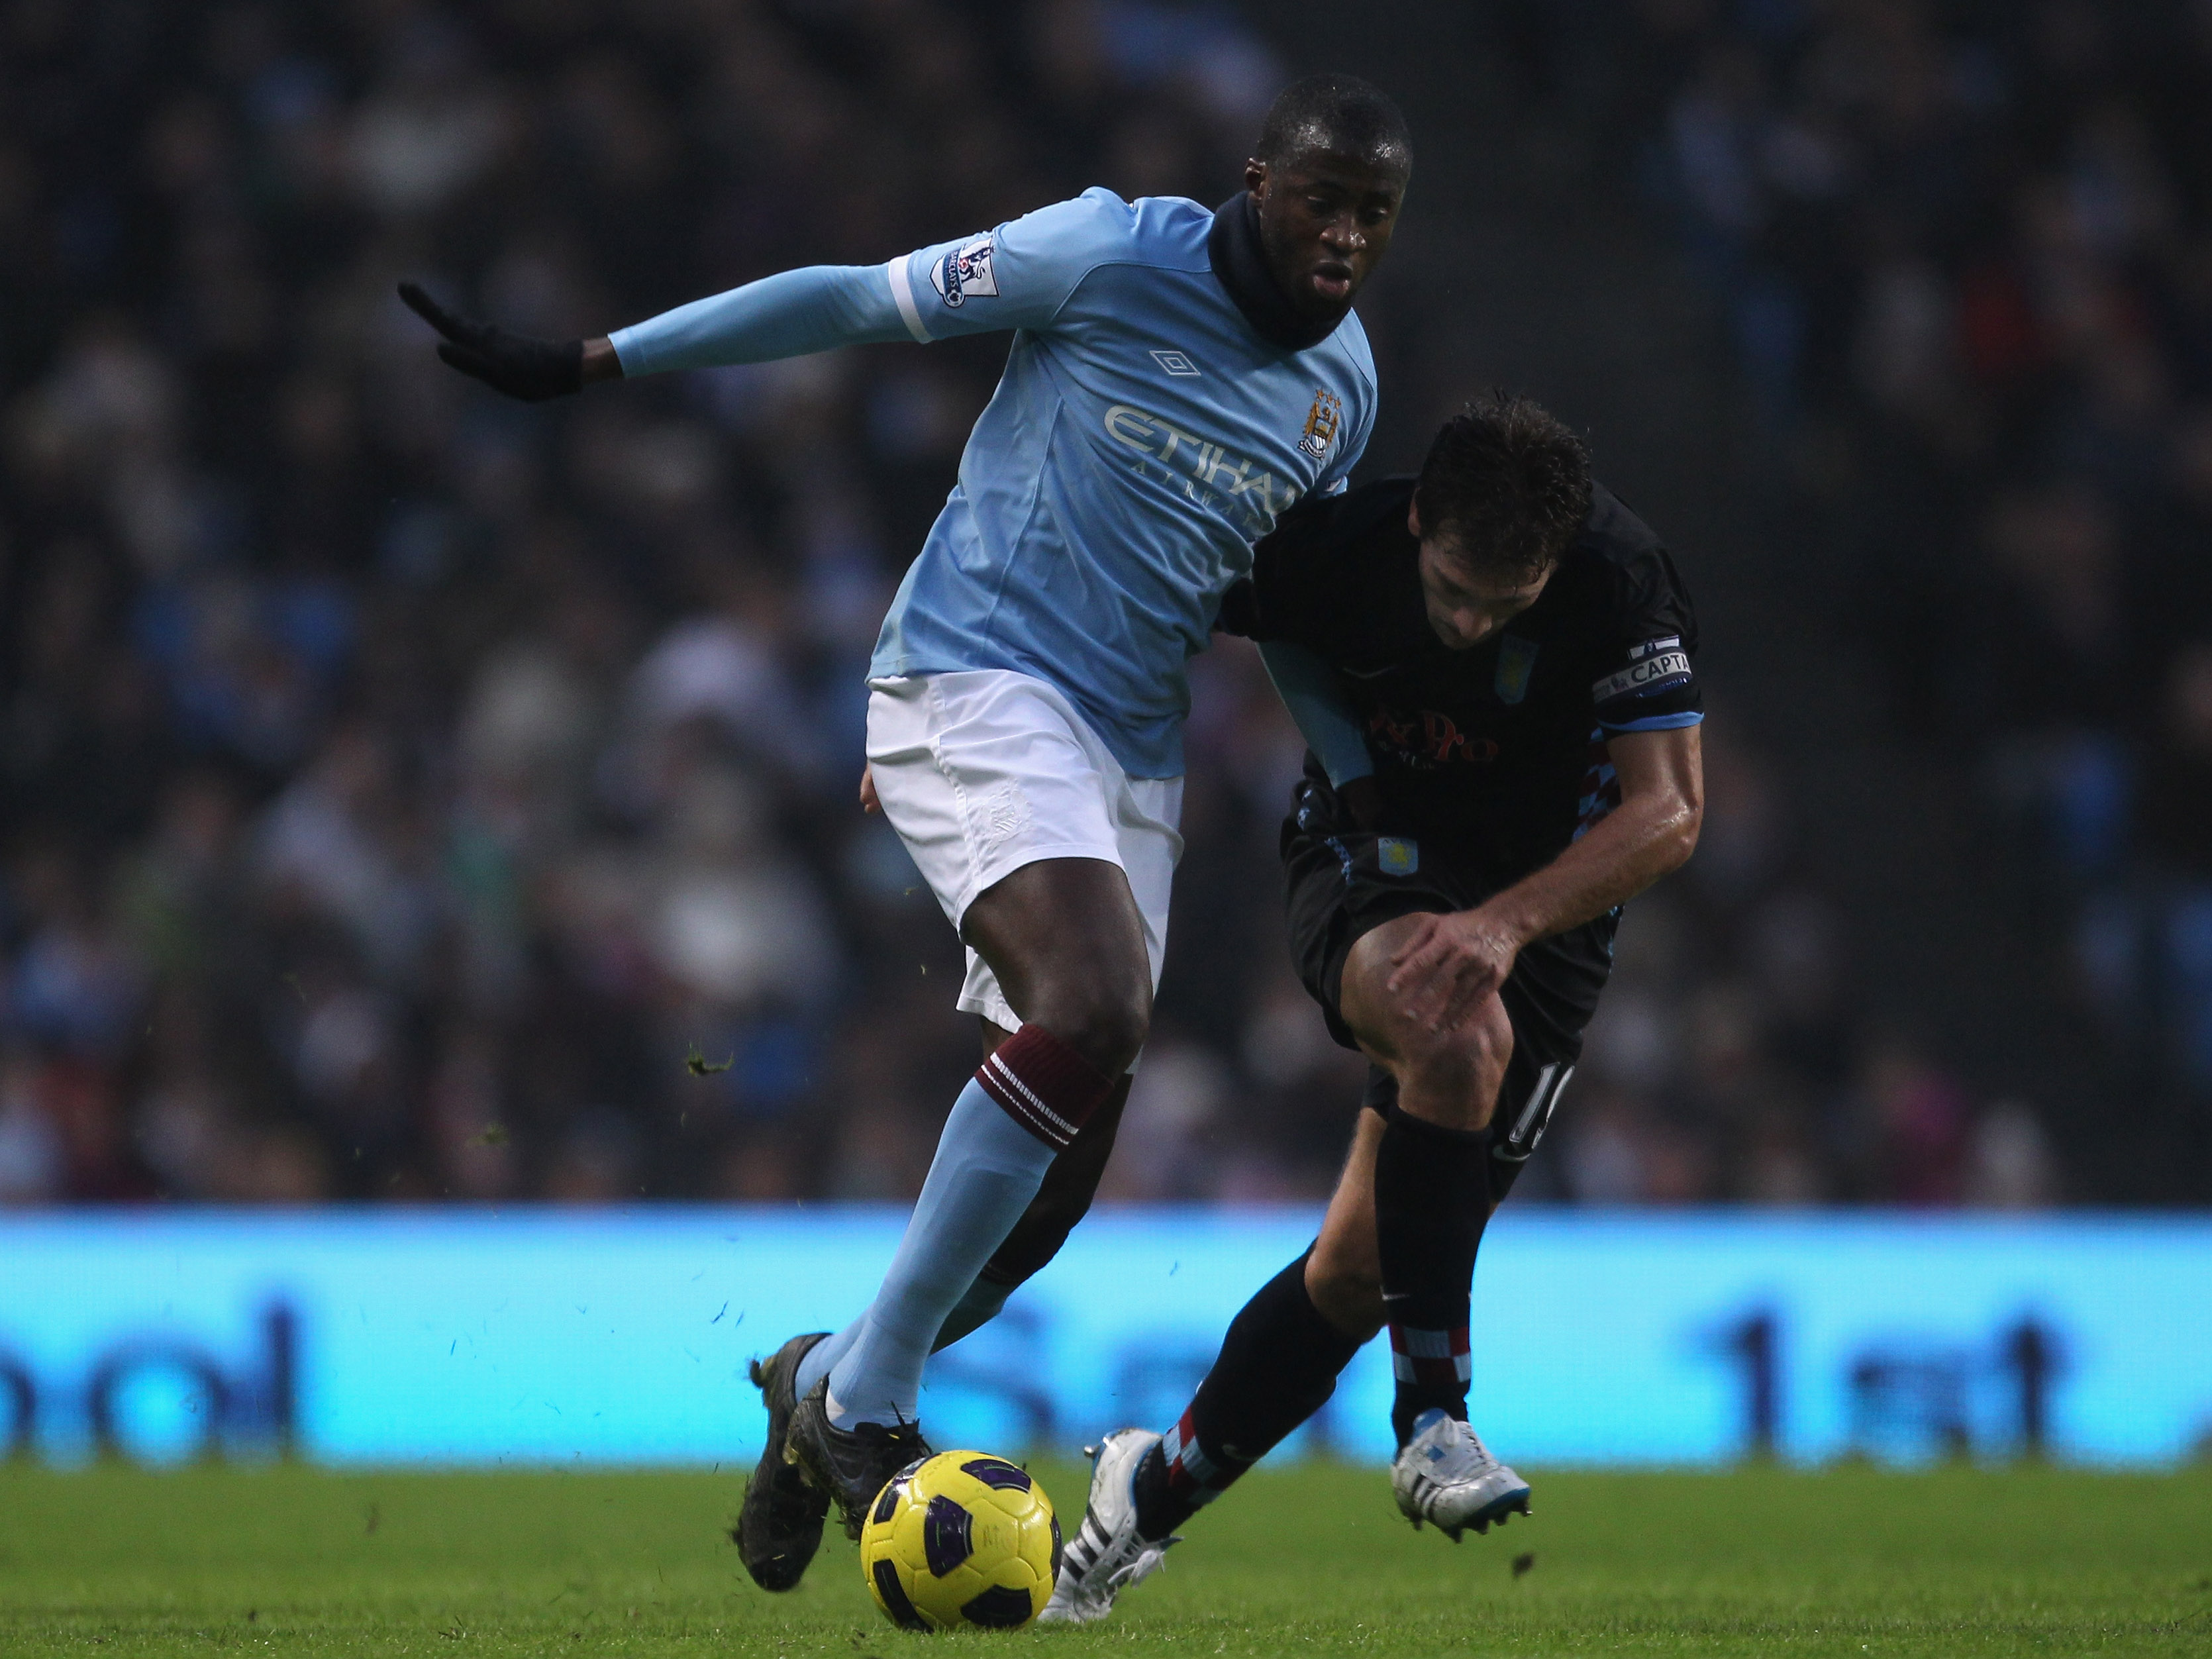 MANCHESTER, ENGLAND - DECEMBER 28:  Yaya Toure of Manchester City holds off a challenge from Stiliyan Petrov of Aston Villa during the Barclays Premier League match between Manchester City and Aston Villa at the City of Manchester Stadium on December 28,